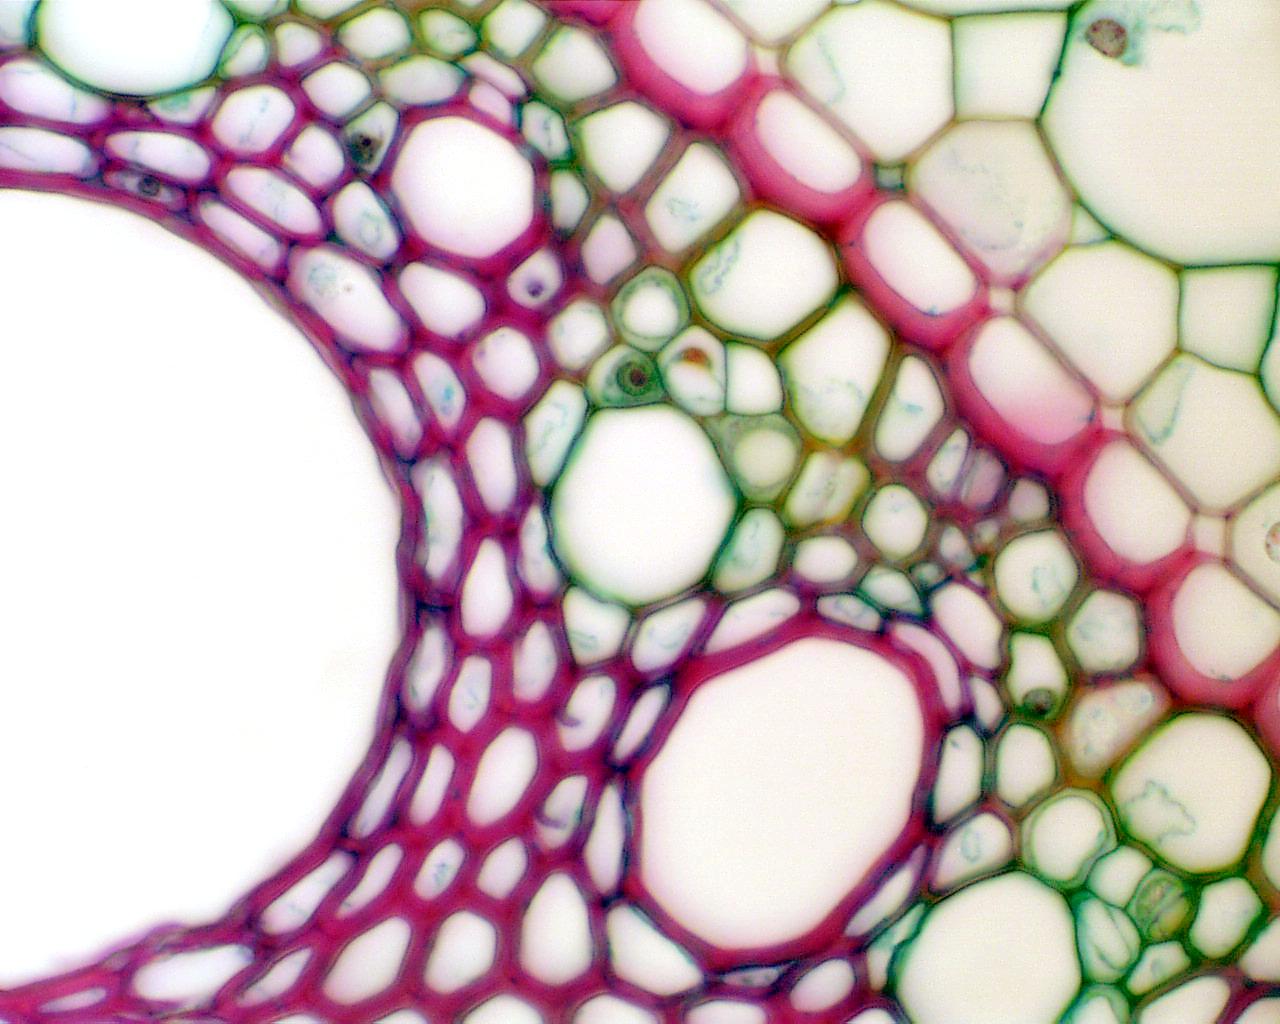 Sieve tube member with companion cell in Zea root cross section